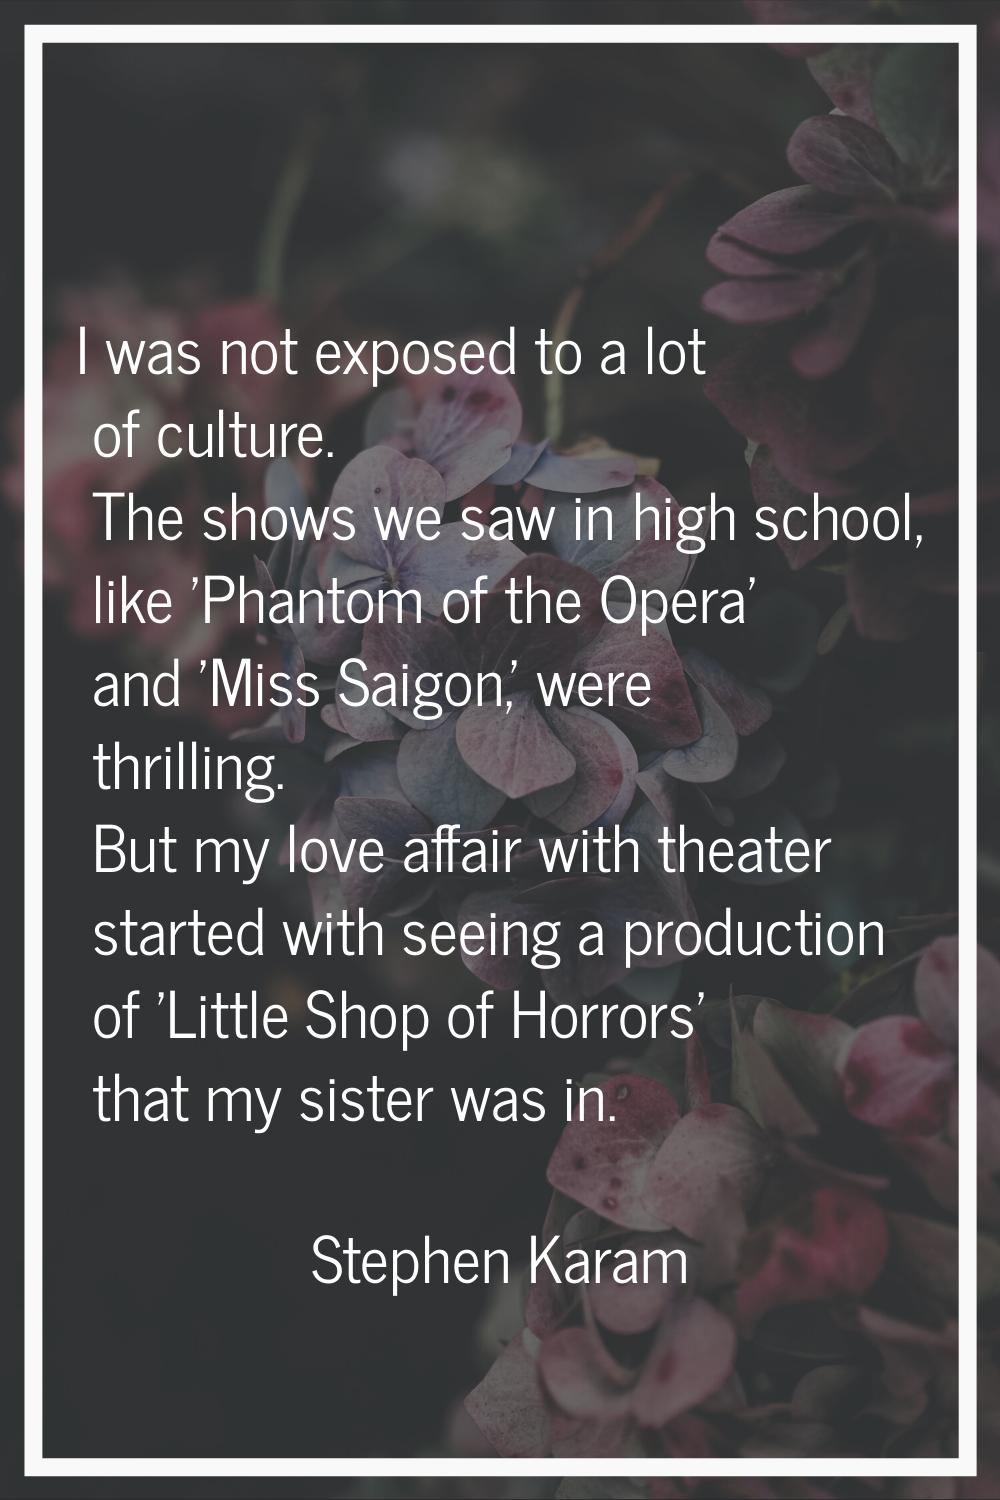 I was not exposed to a lot of culture. The shows we saw in high school, like 'Phantom of the Opera'